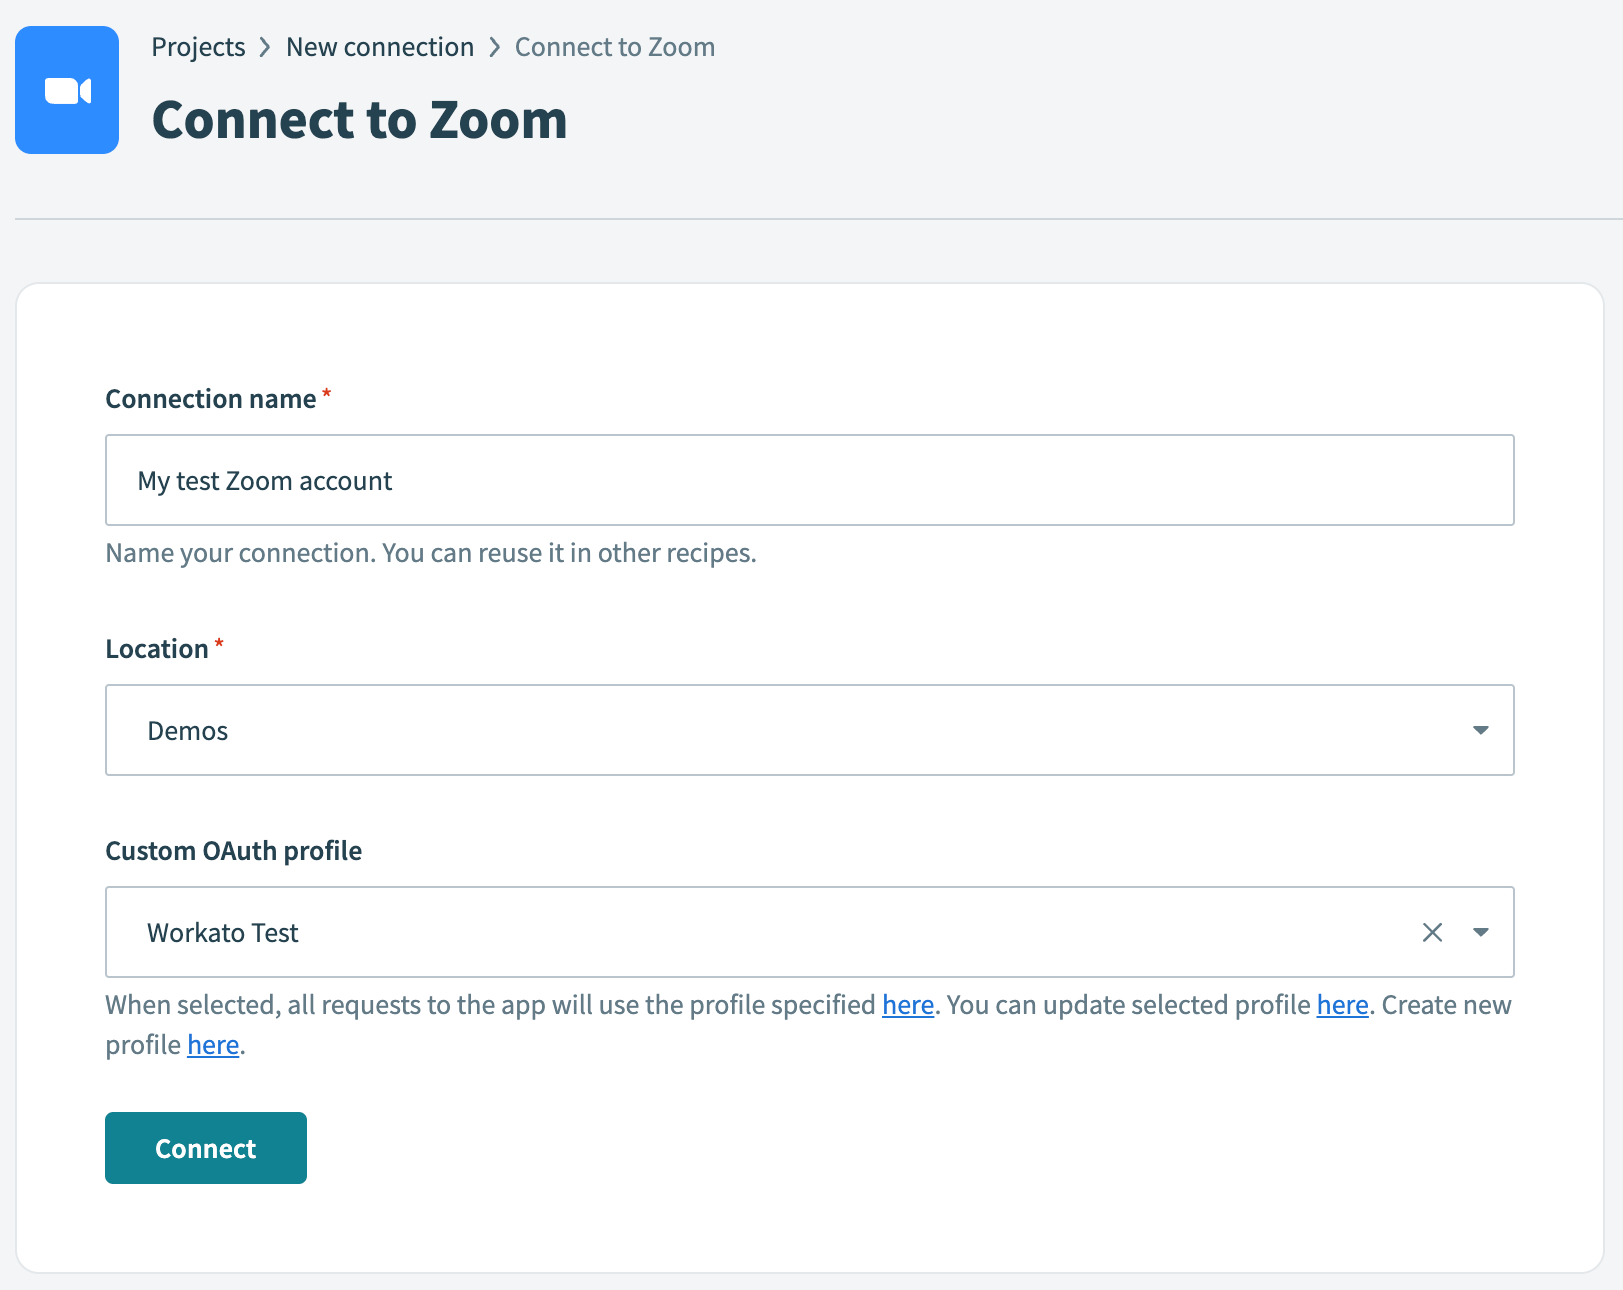 Connect to Zoom using custom OAuth profile